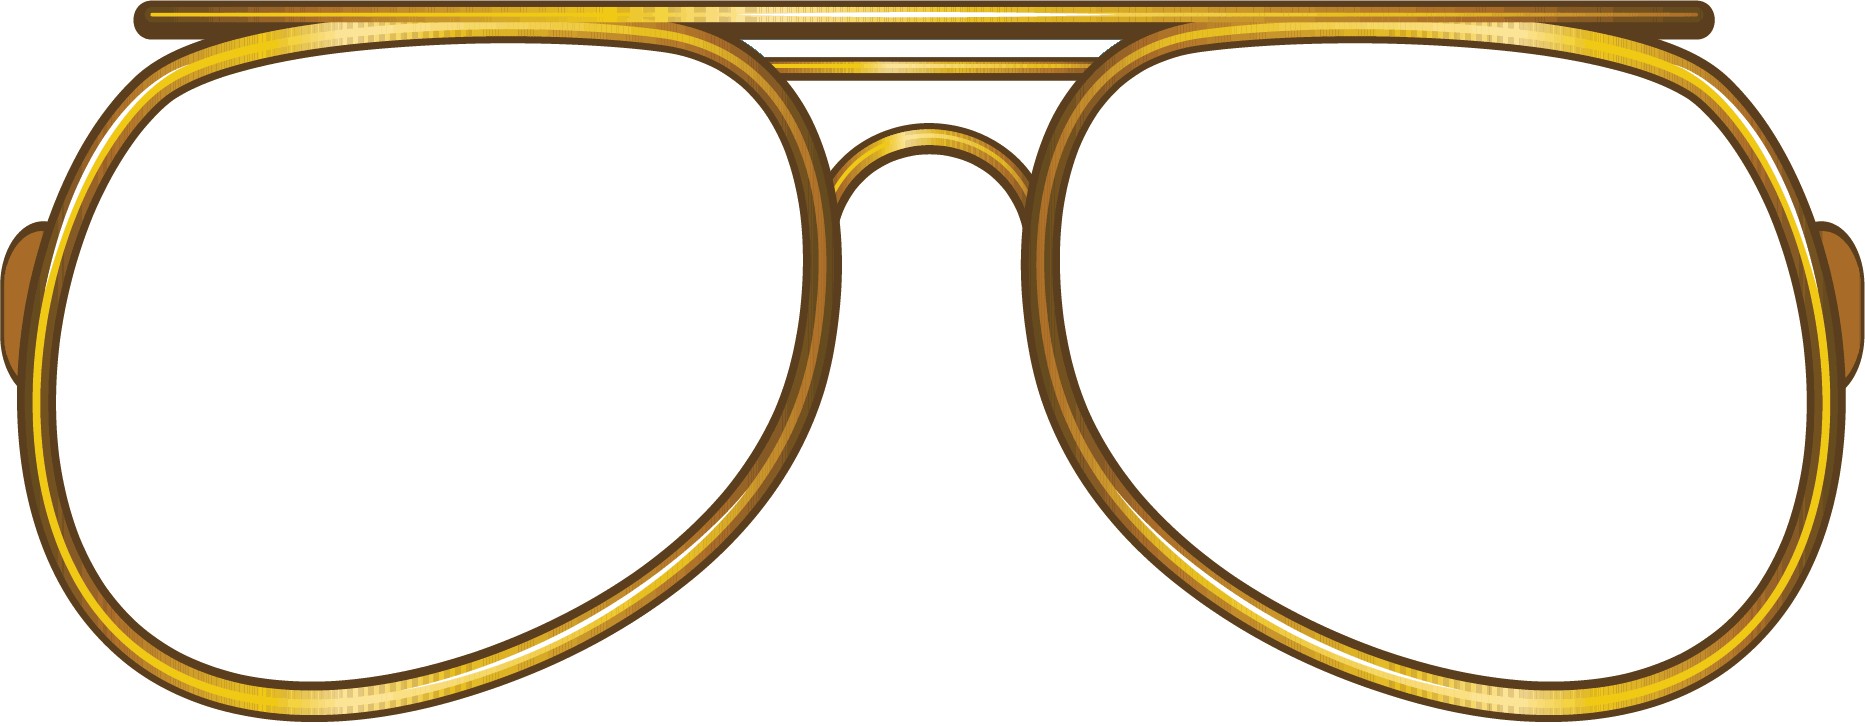 Glasses clipart free cliparts for work study and 3